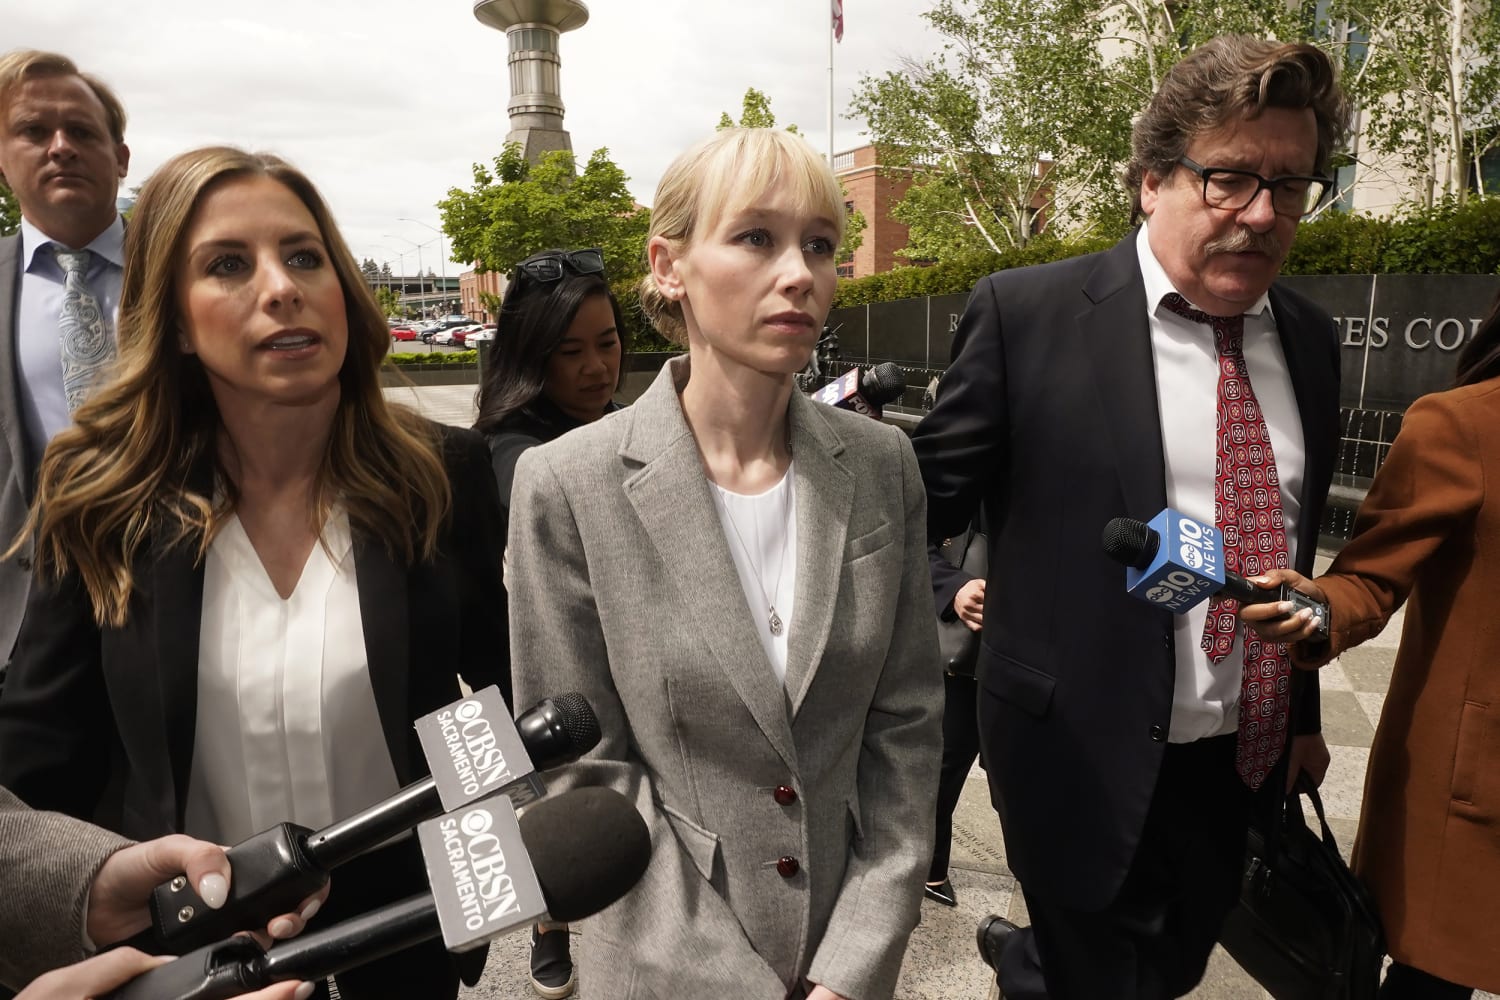 Sherri Papini, California woman who faked her kidnapping in 2016, pleads guilty to hoax image